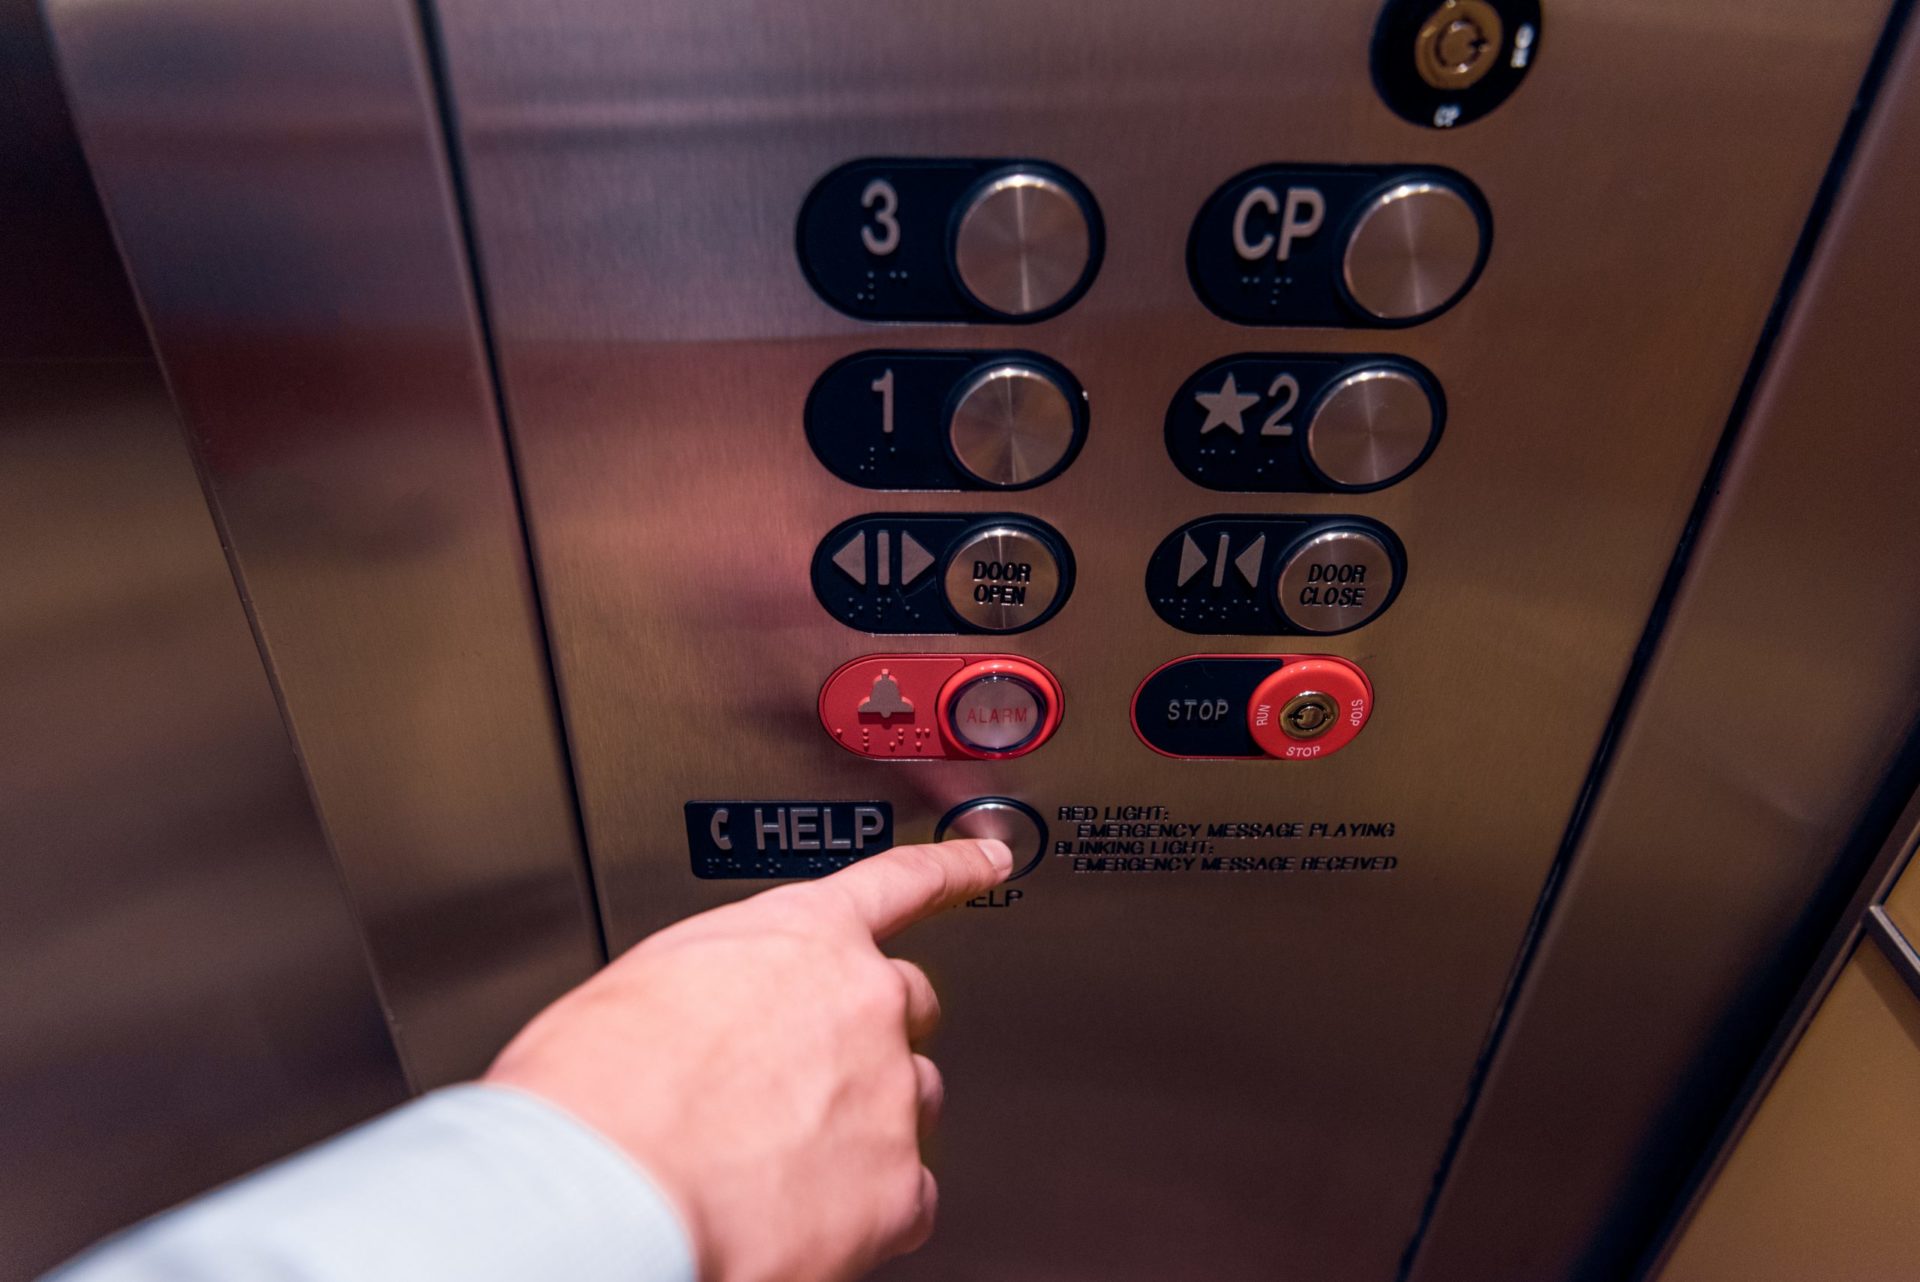 What We Can Learn From Elevator Entrapment